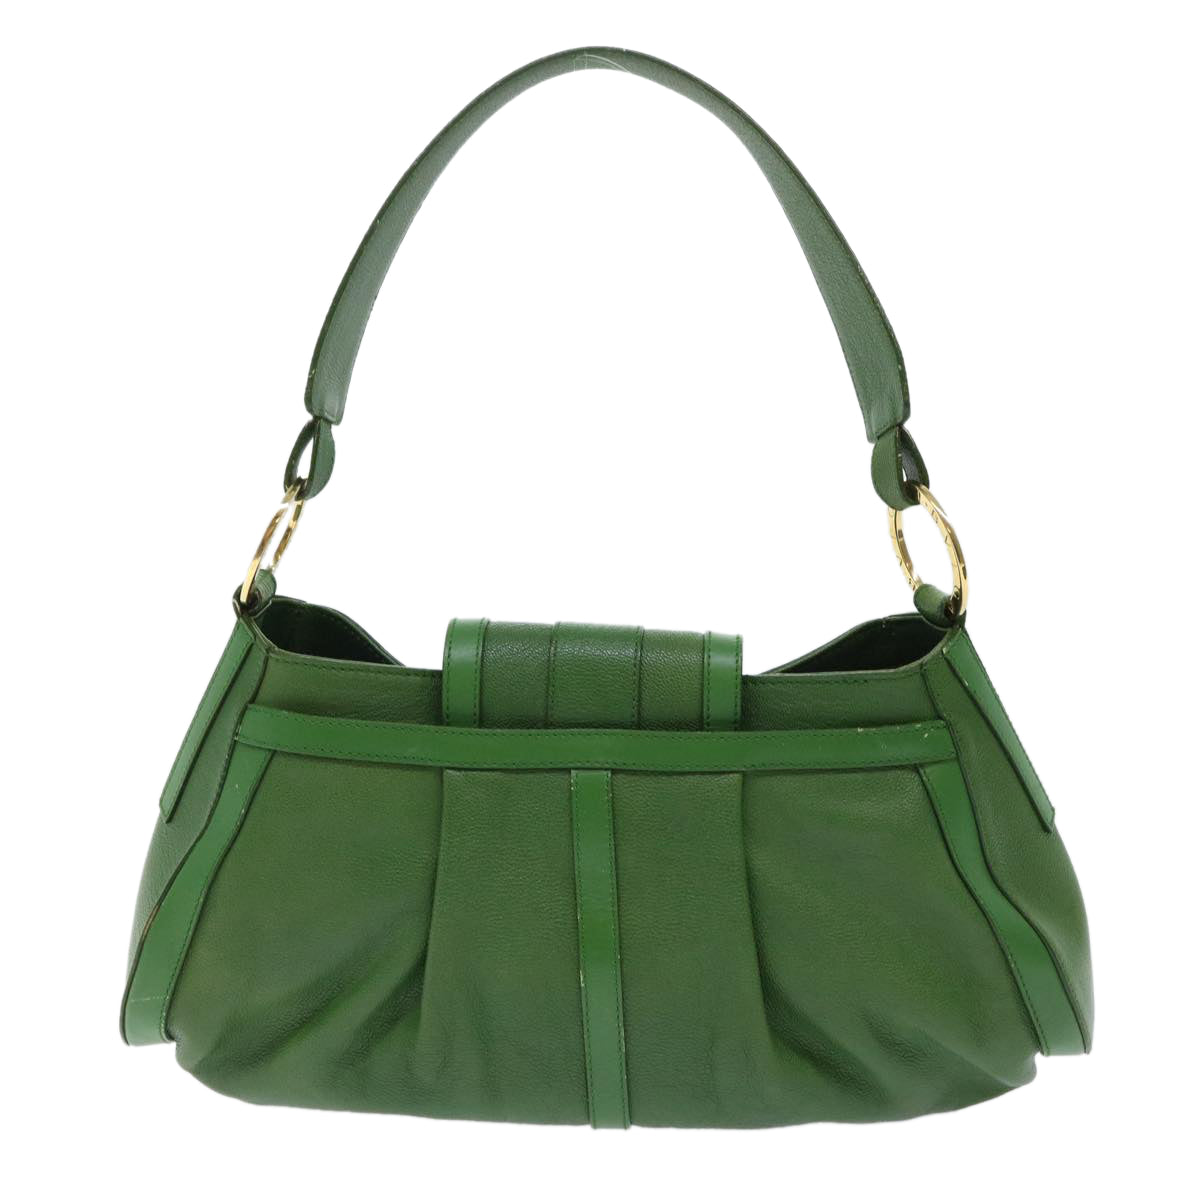 BVLGARI Shoulder Bag Leather Green Auth ep1308